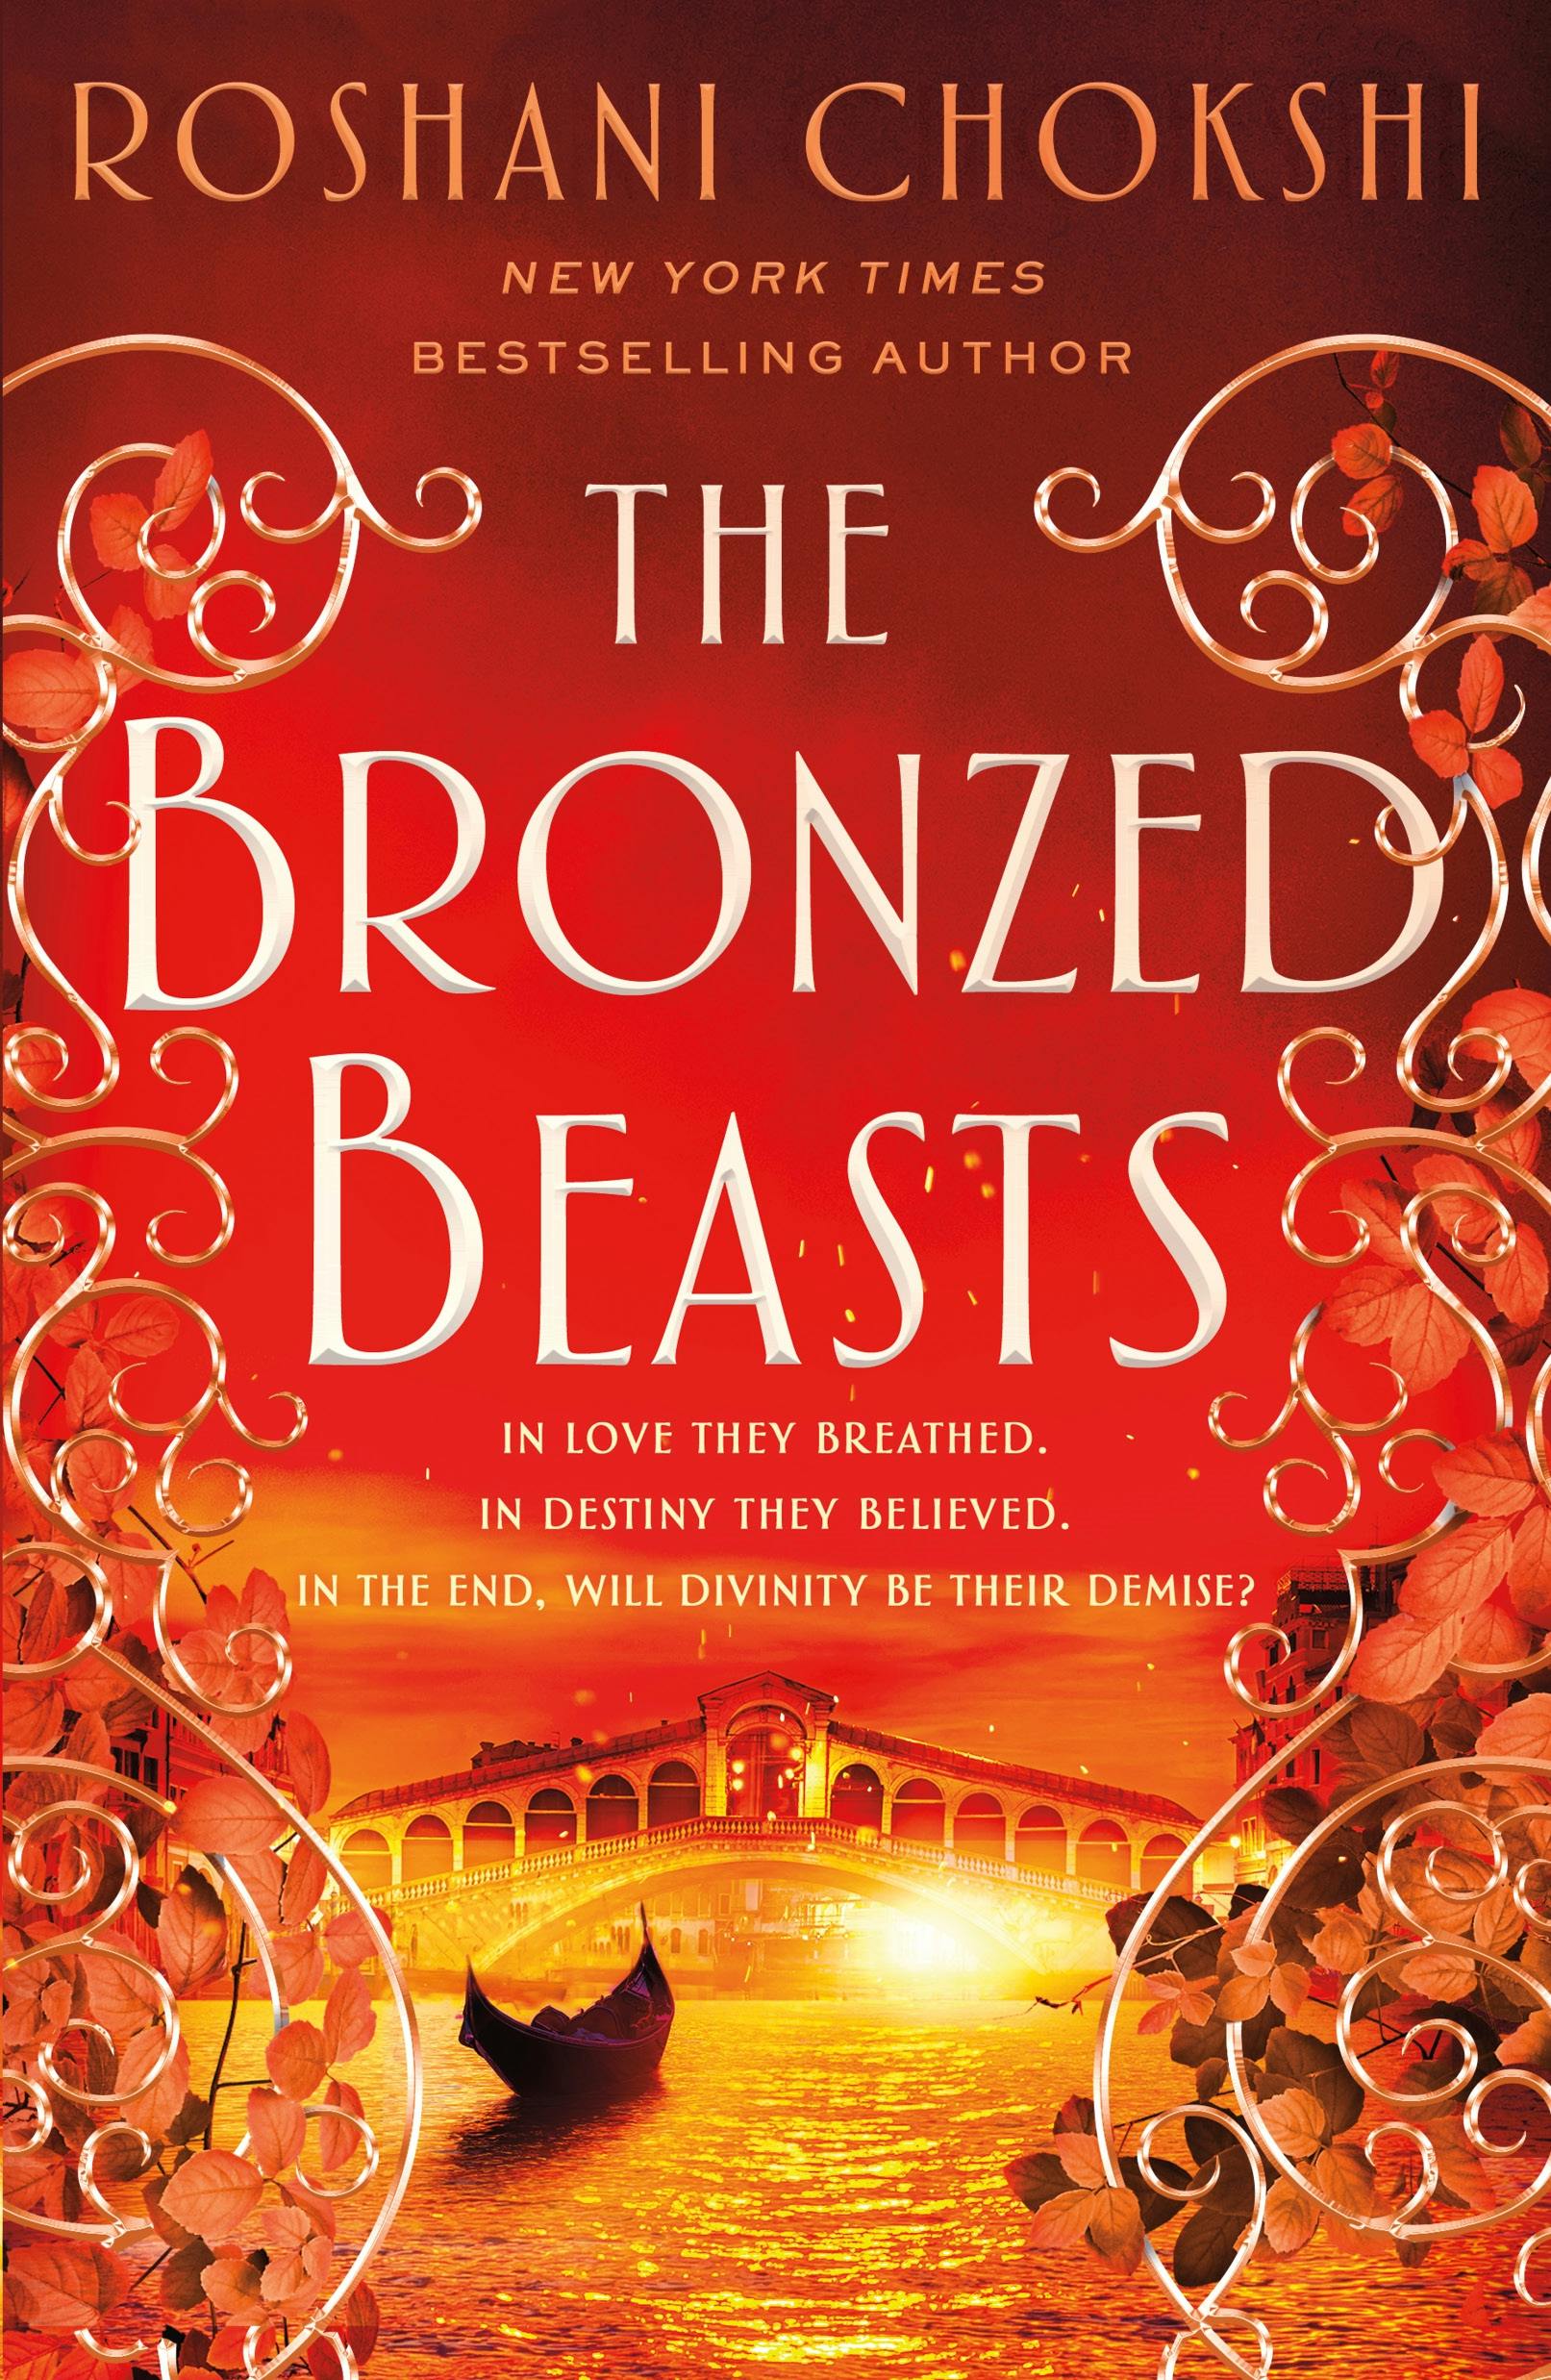 Image of The Bronzed Beasts